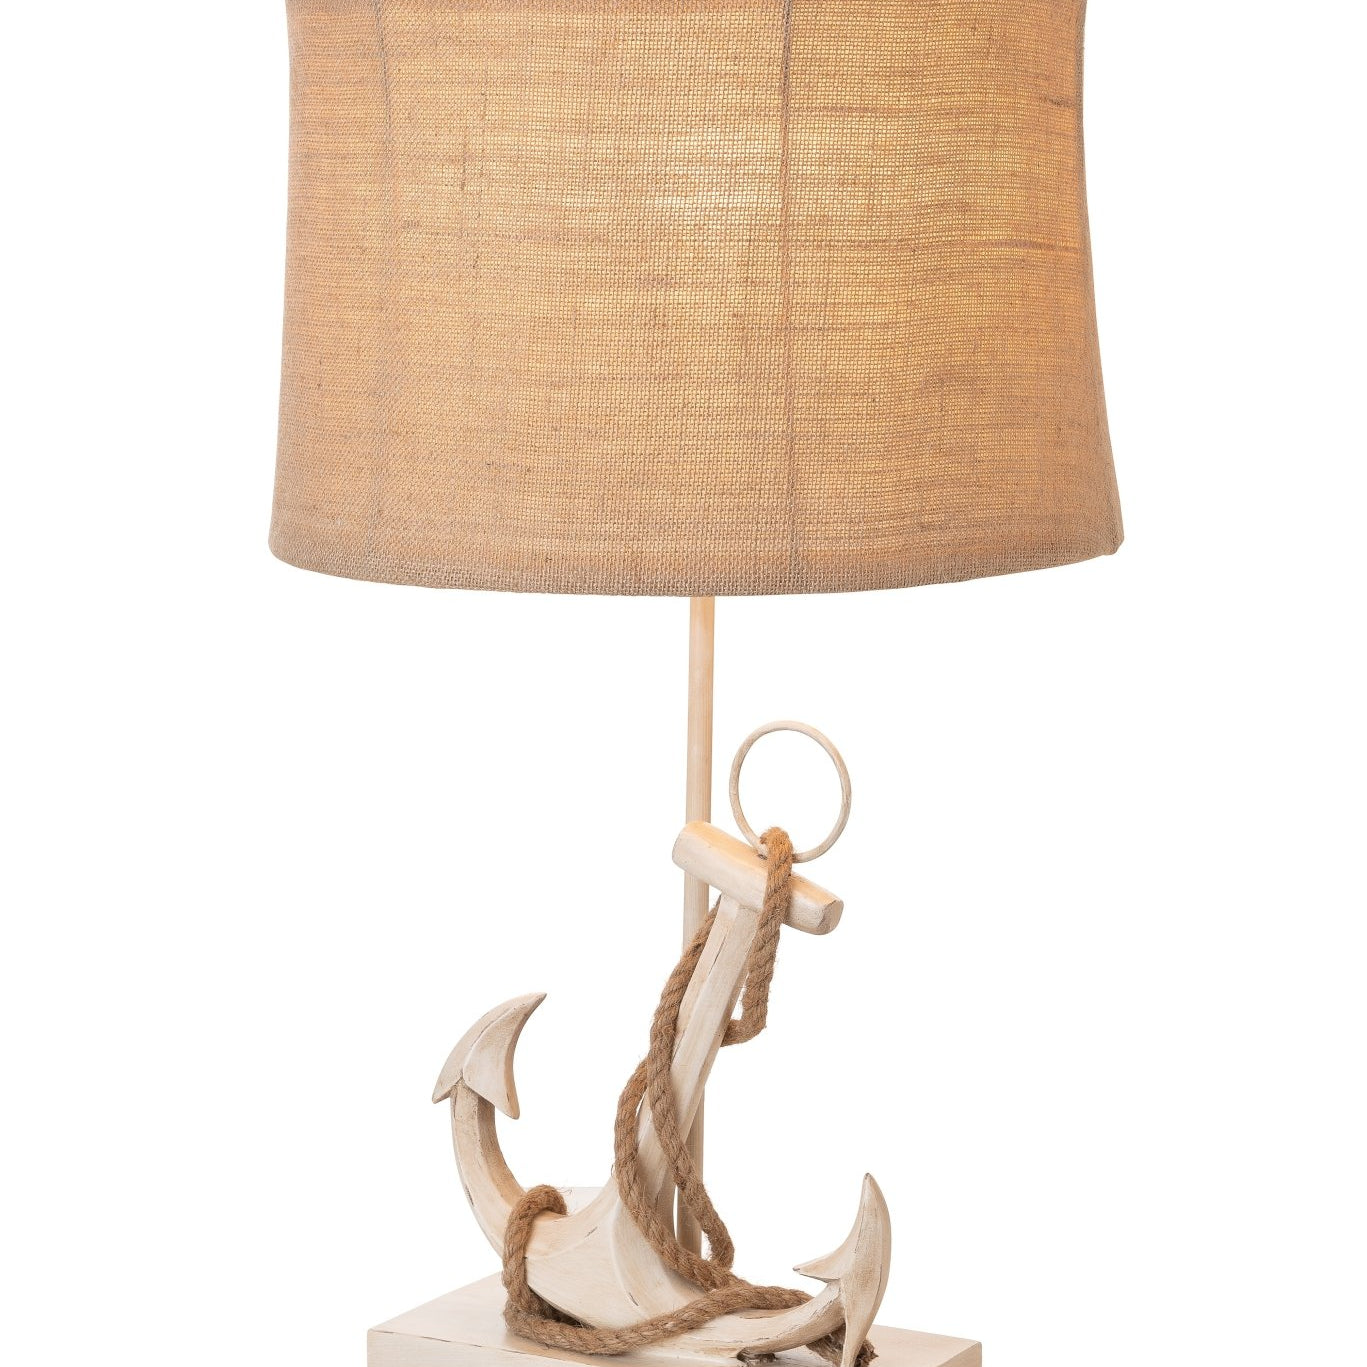 Anchor 28" Distressed White Polyresin Coastal Table Lamp, (Set of 2) - Table Lamps